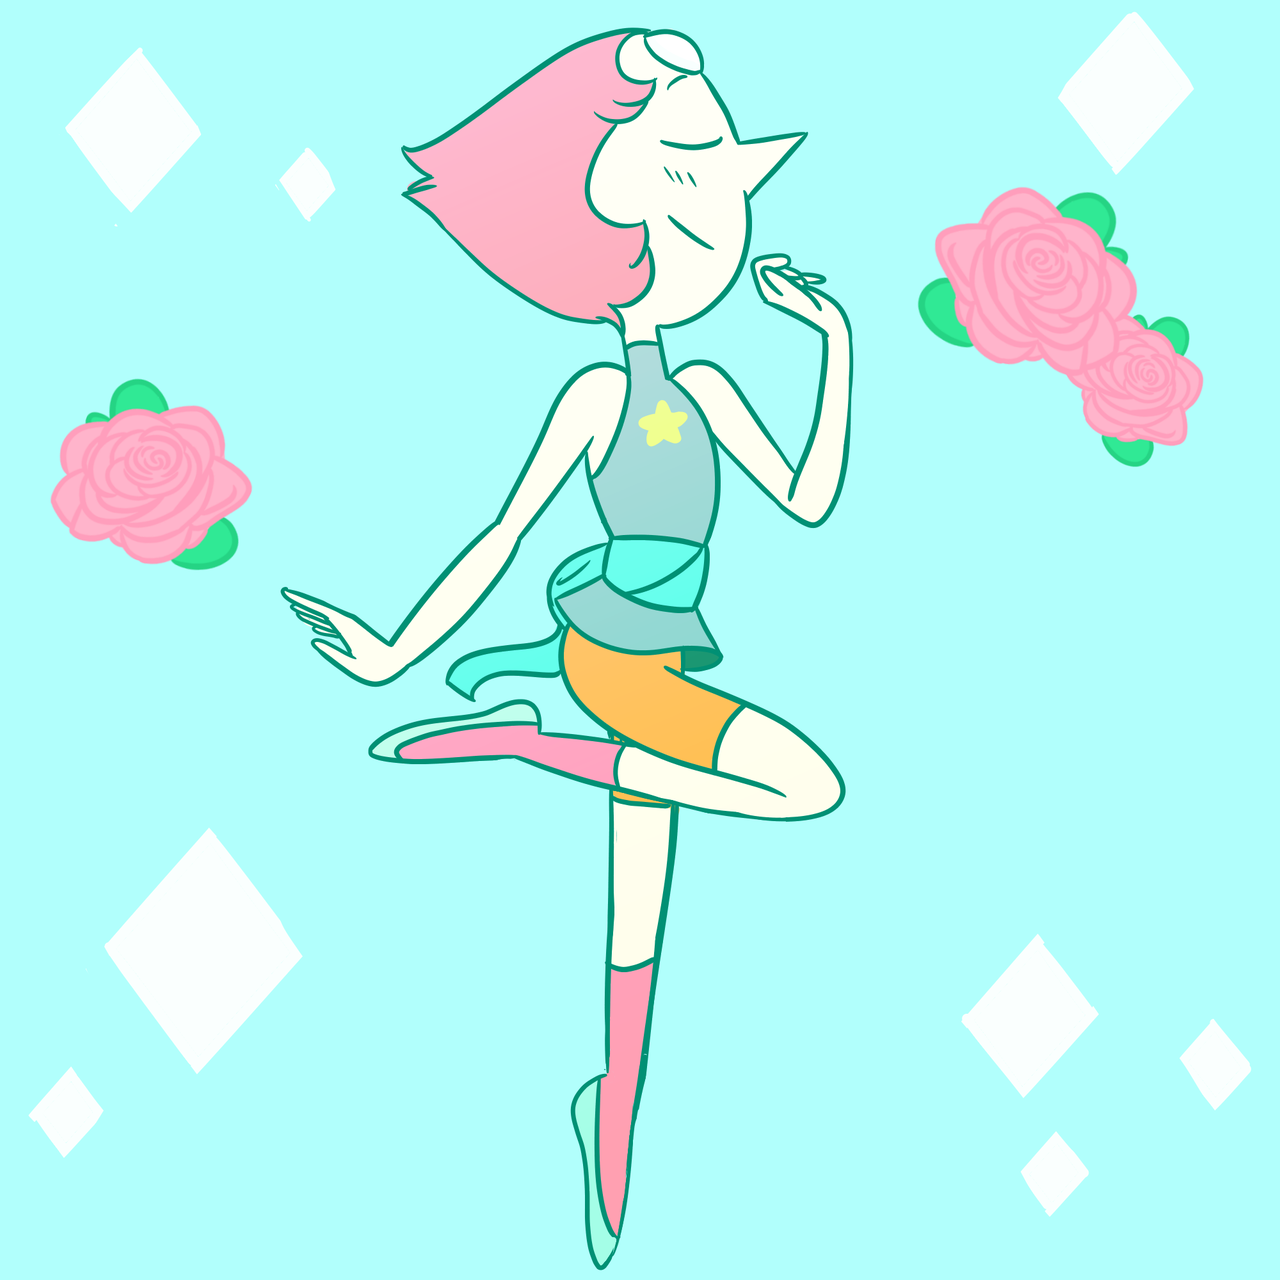 Day 3: Pearl